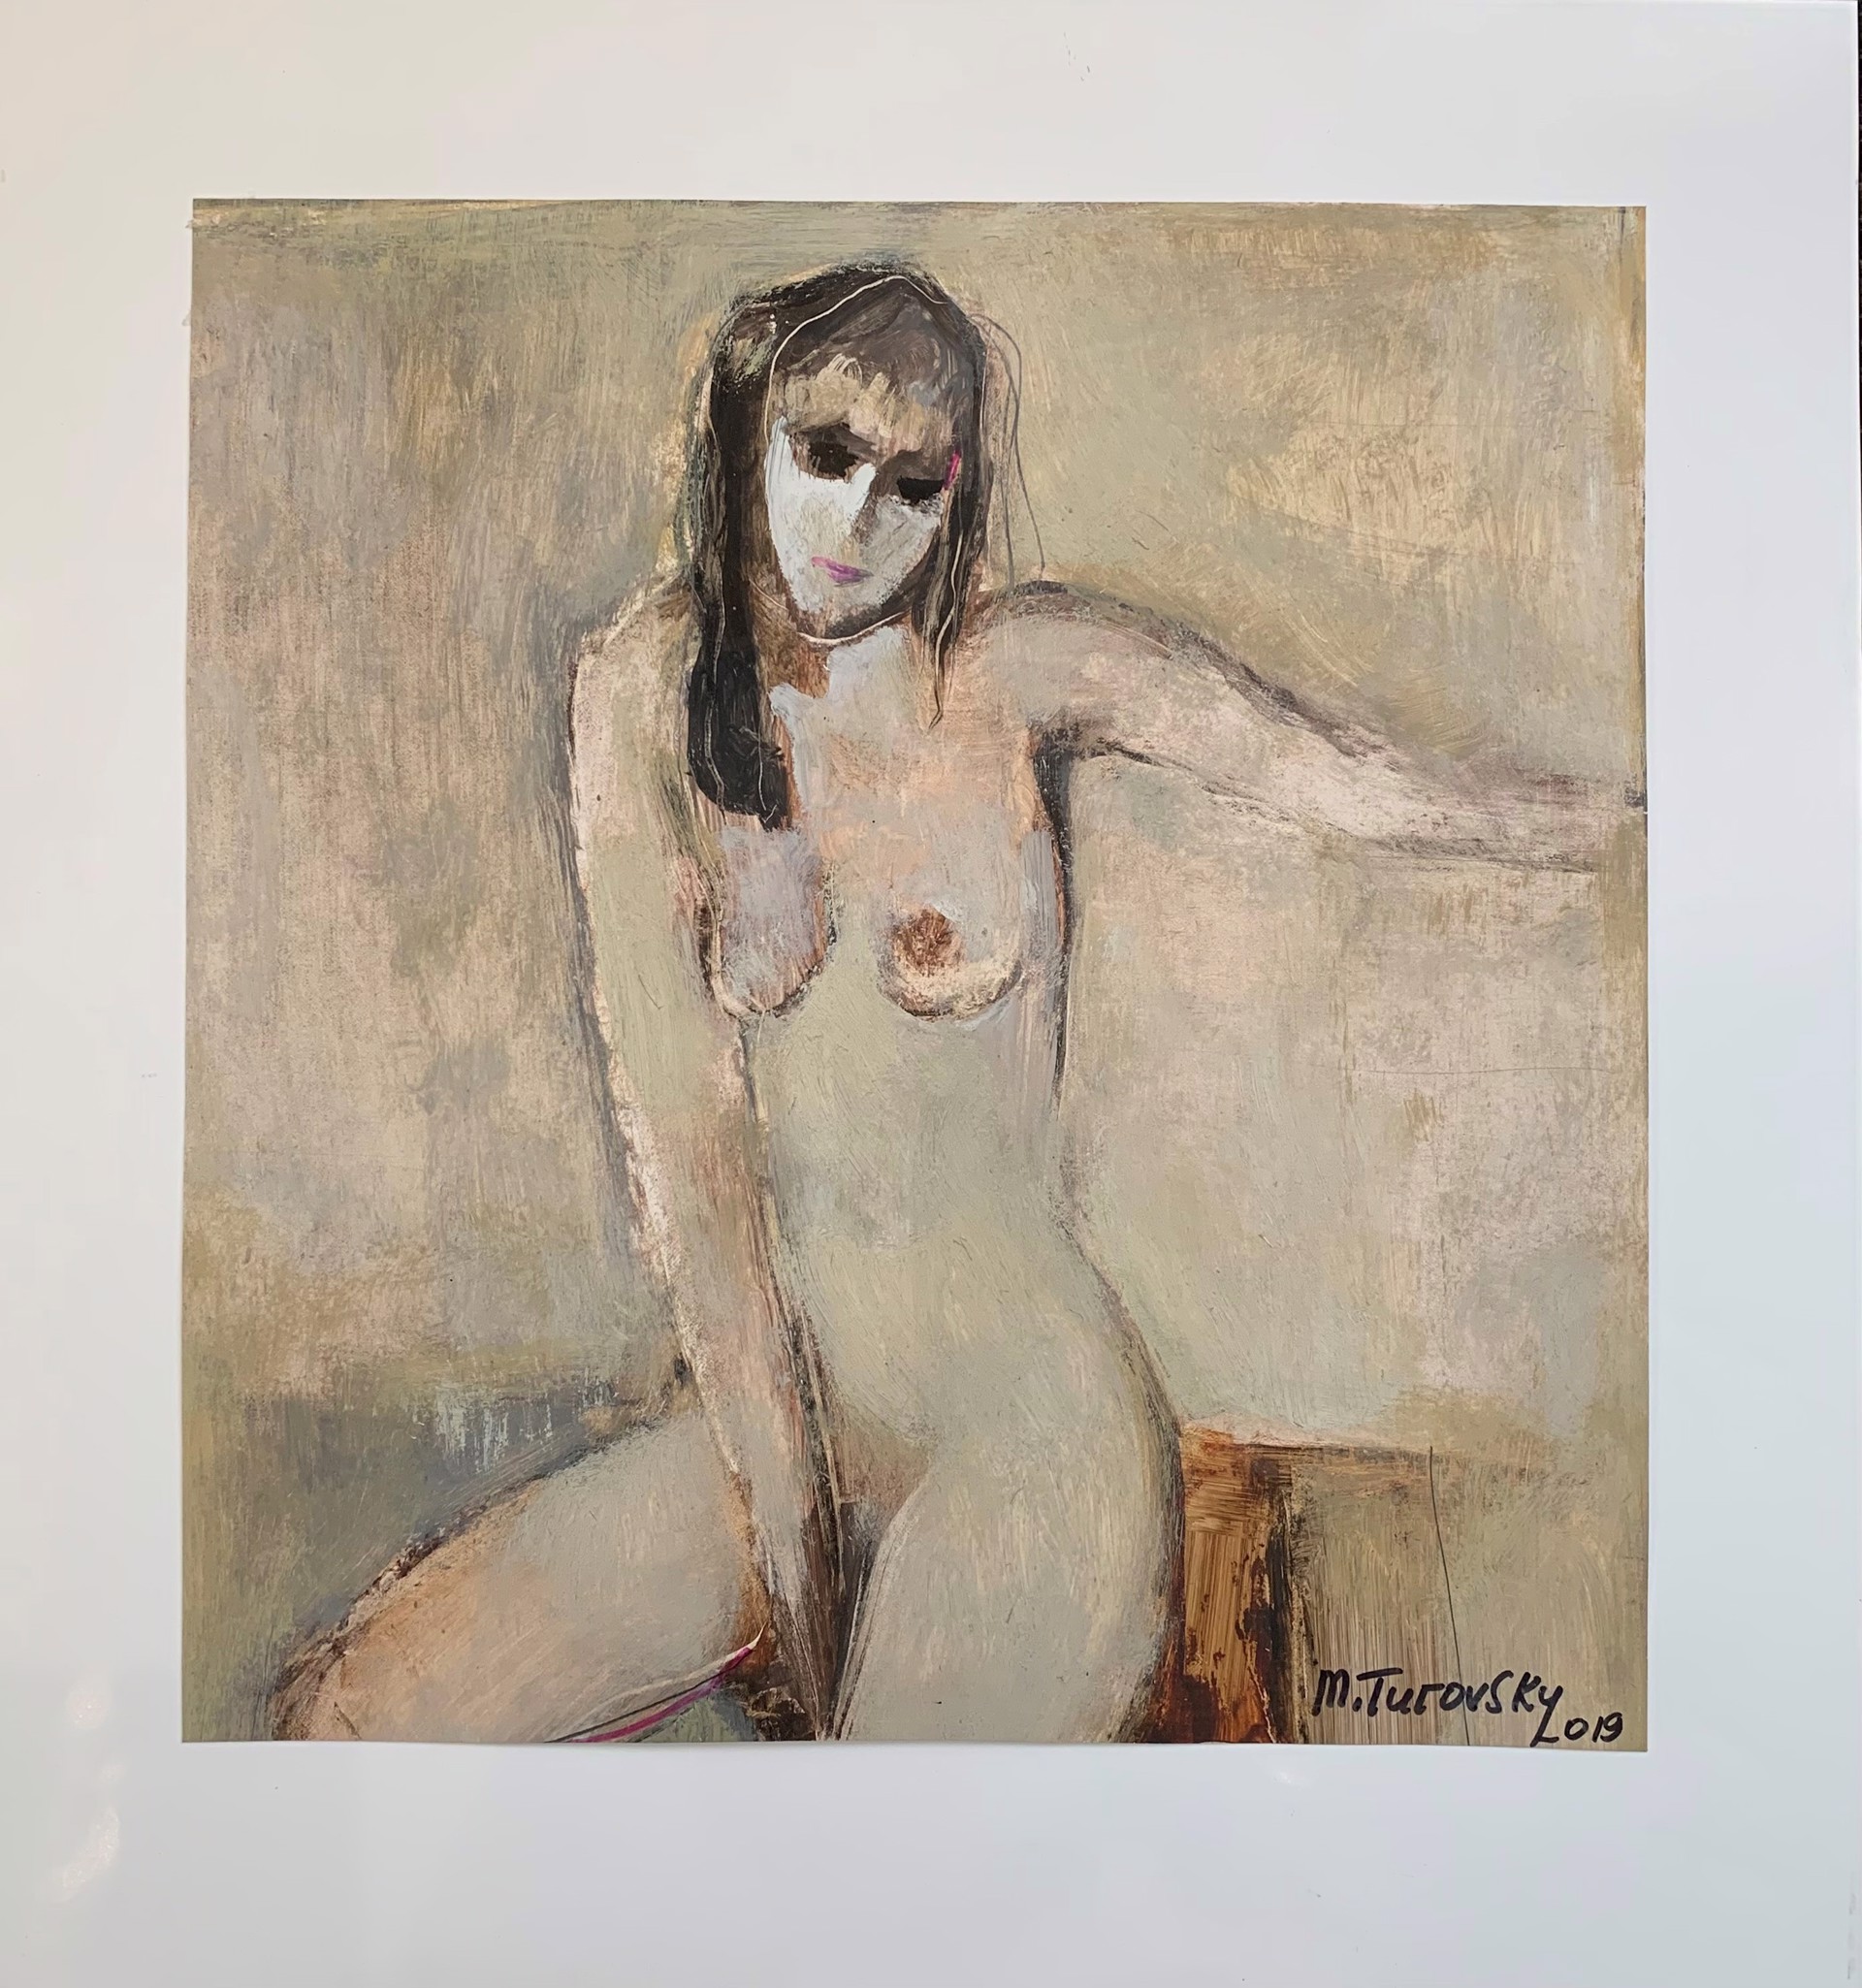 Nude 2019 (Benefit for Limbs For Liberty Ukraine) by Mikhail Turovsky